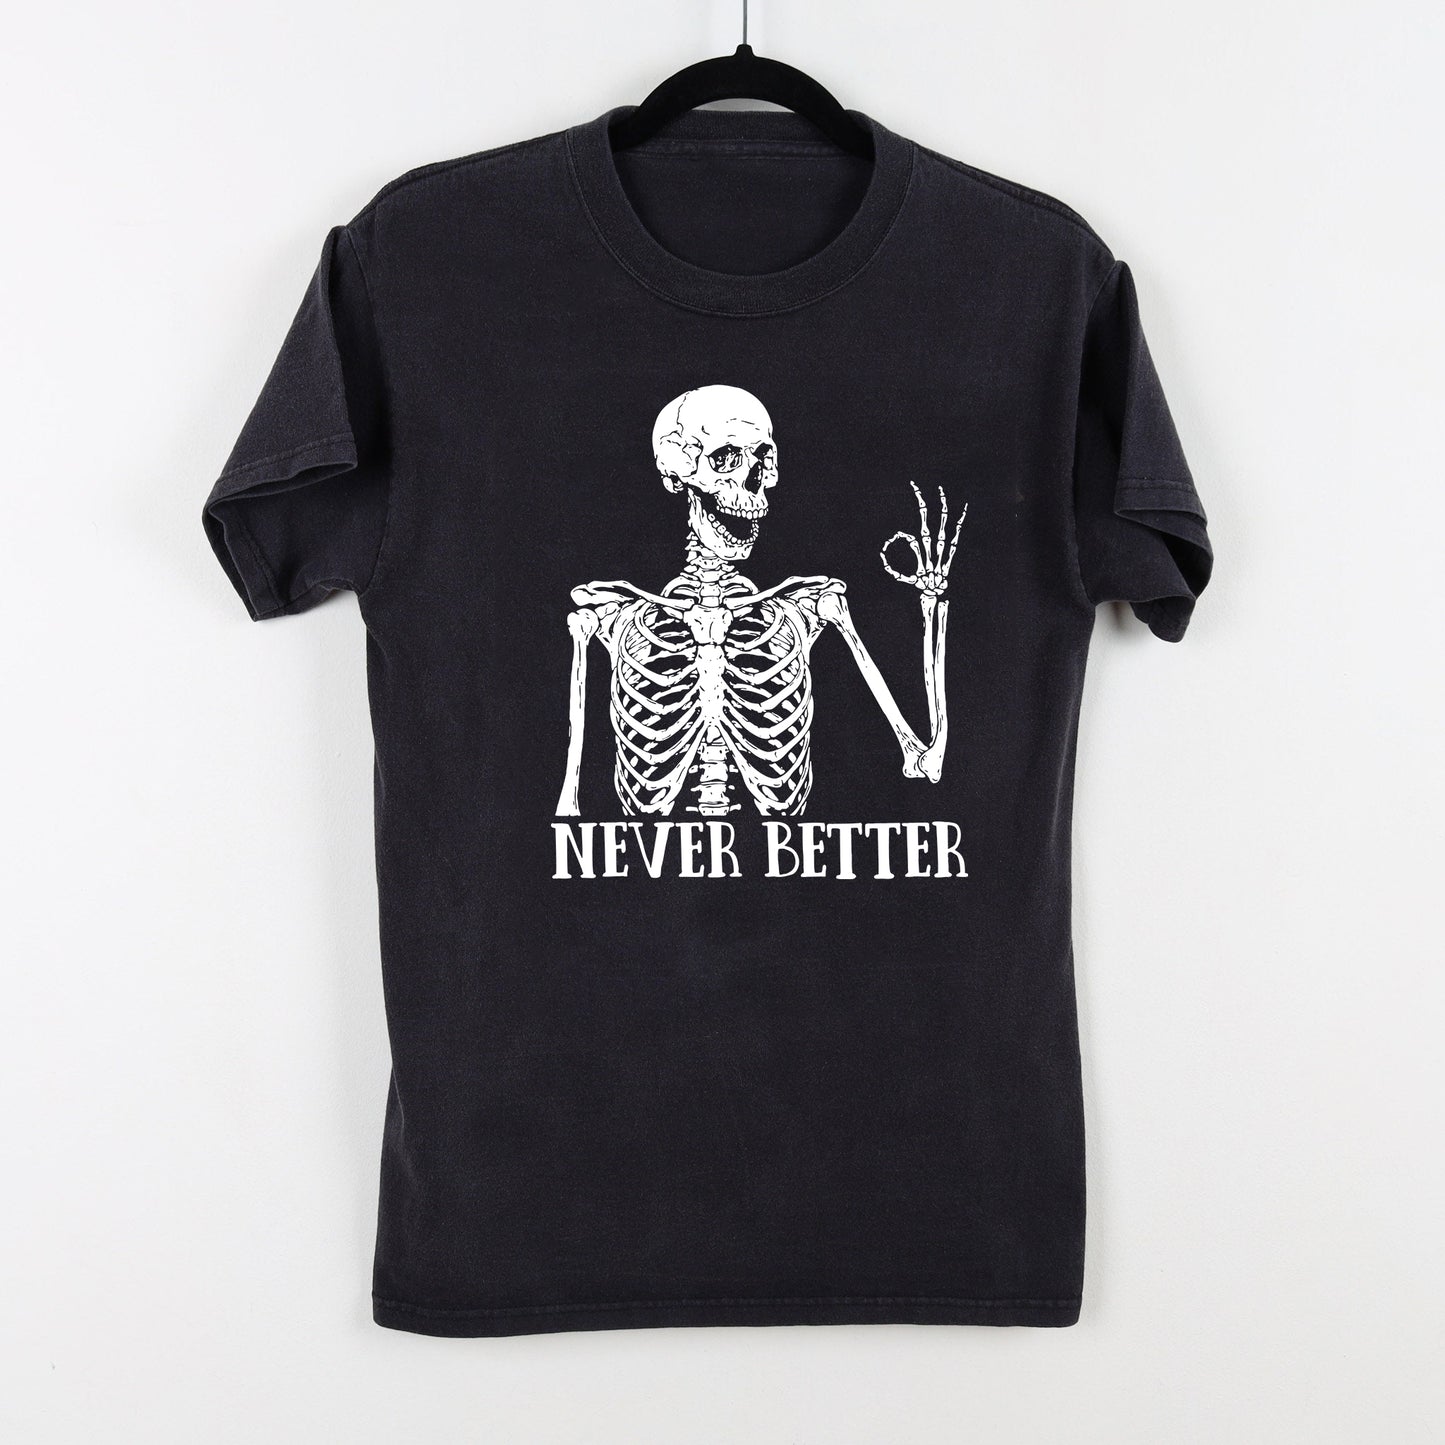 Unisex Comfort Colors Never Better Skeleton T-Shirt, Funny Dead Inside Sarcastic Shirt, Funny Gifts, Funny Sayings Shirt, Funny